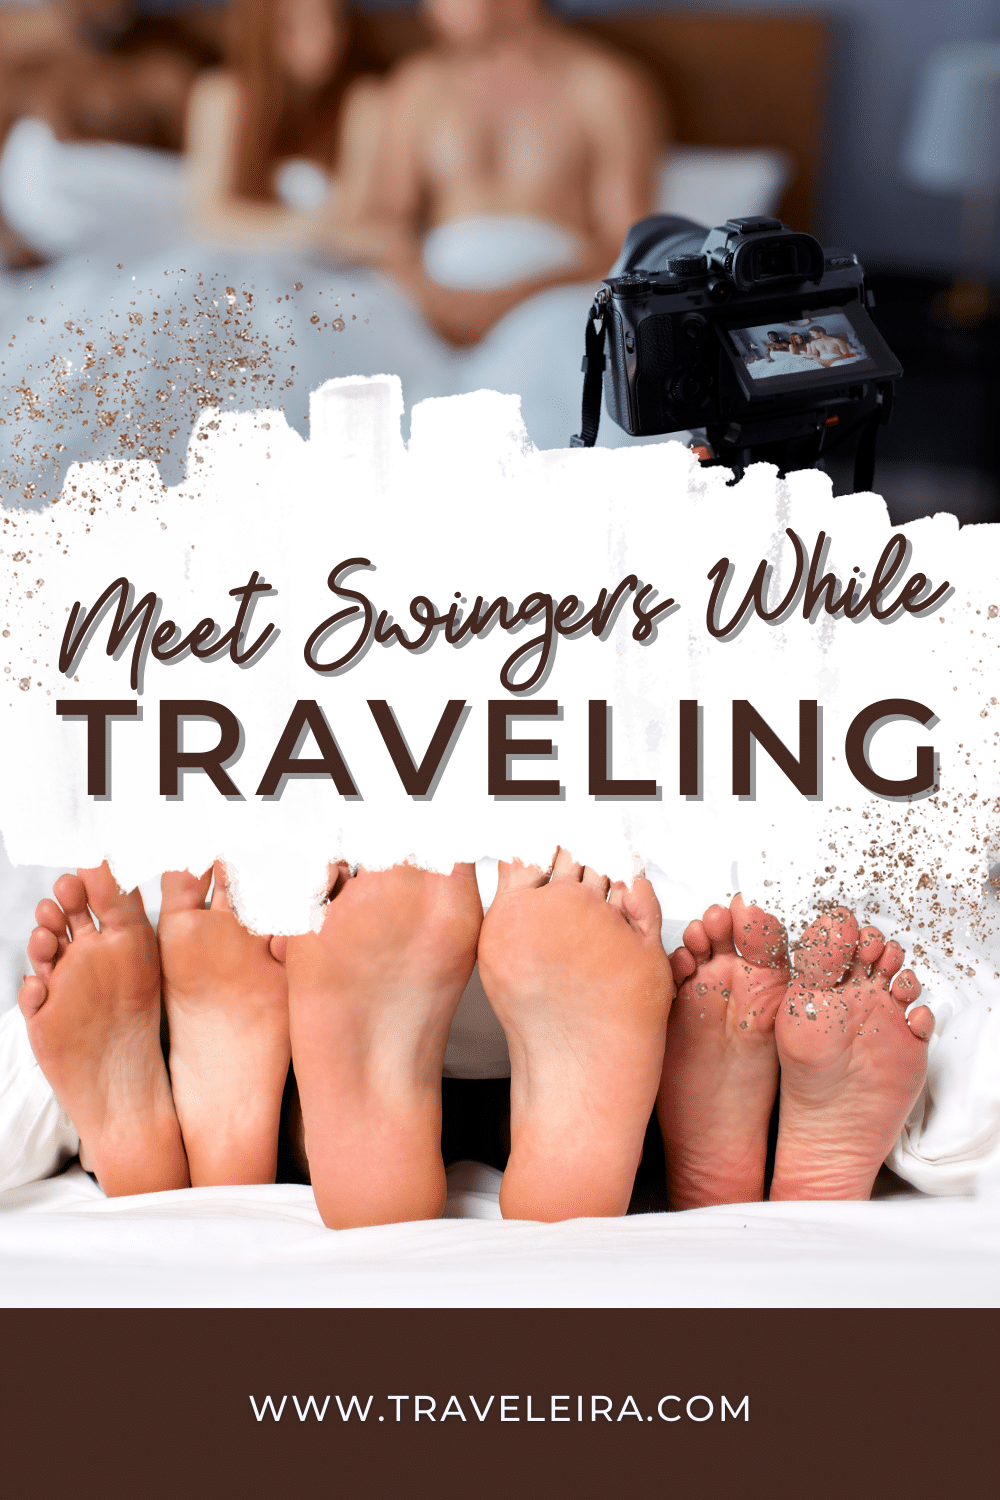 Discover the best tips to meet swingers while traveling including the best apps to connect with other swingers couples.